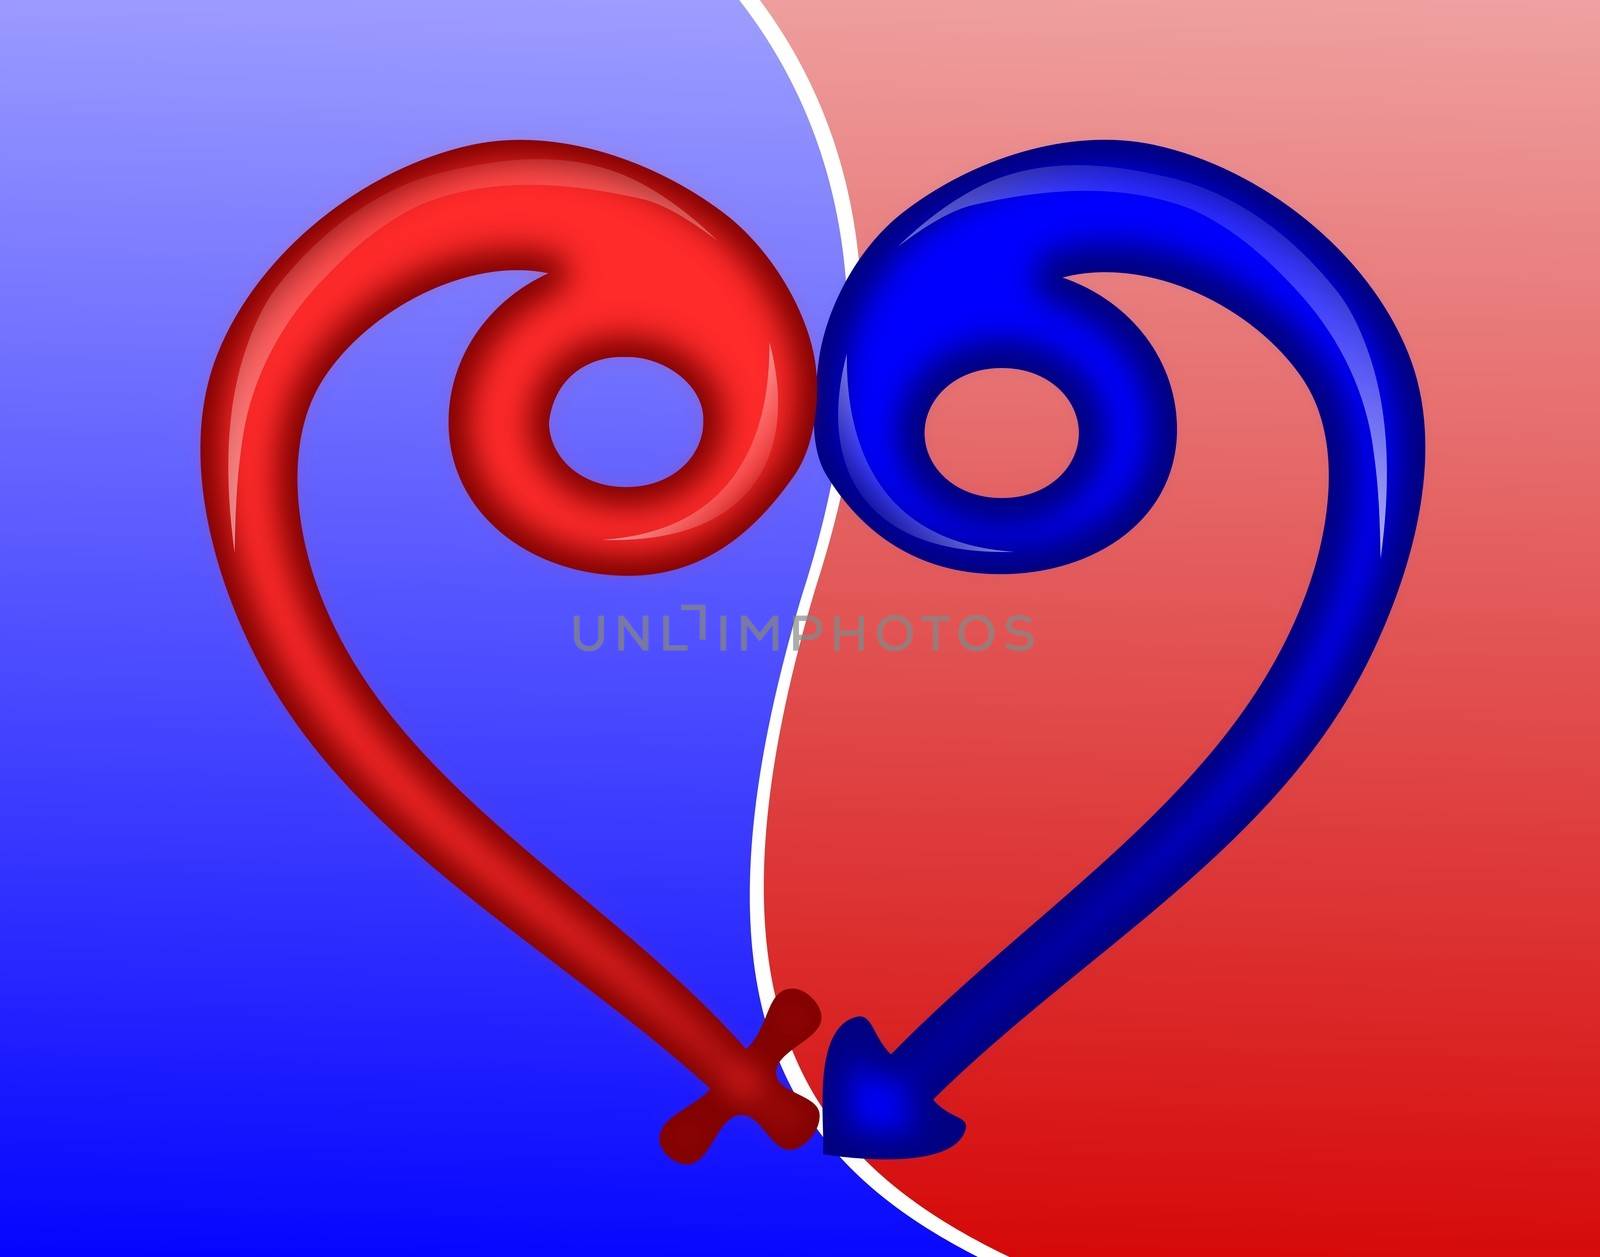 Concept of love illustrated with a male and female icon signs forming a heart shape
